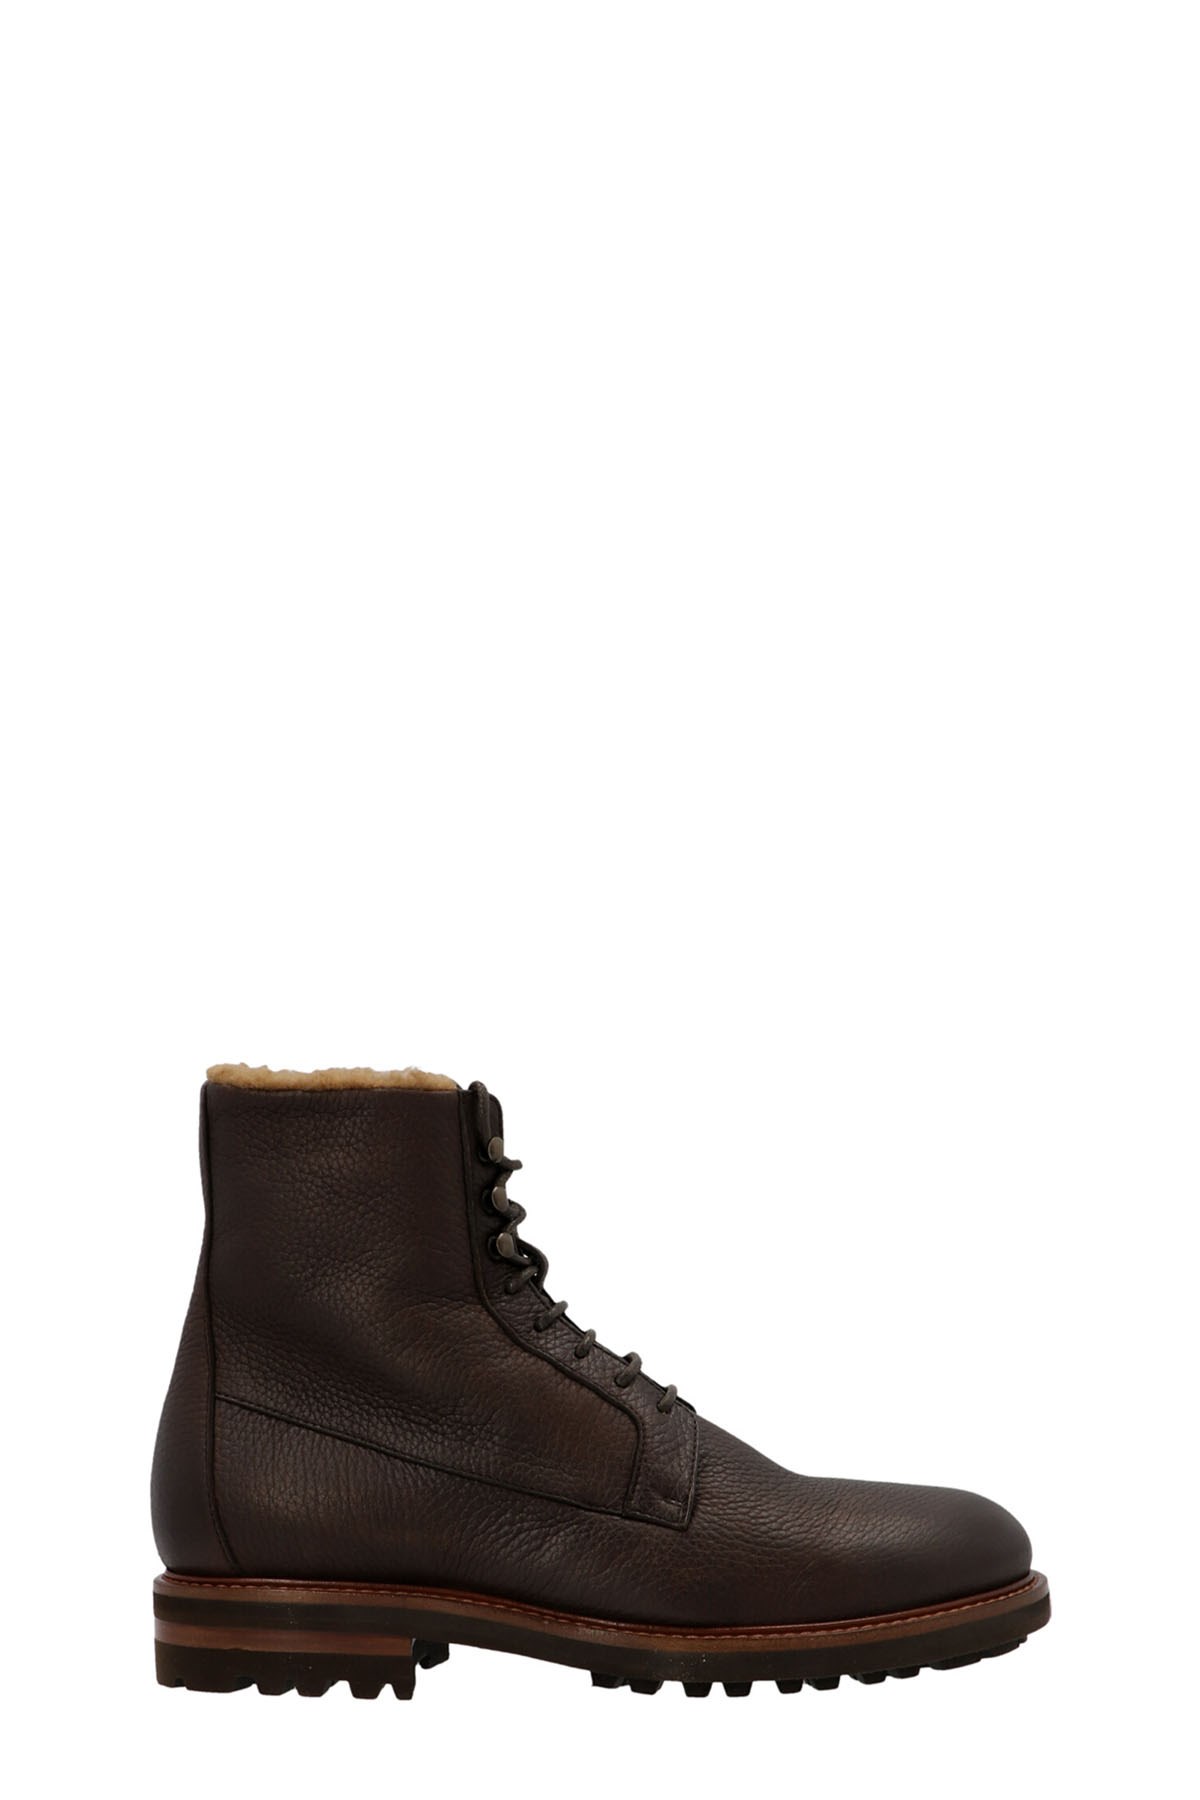 BRUNELLO CUCINELLI Lace-Up Ankle Boots